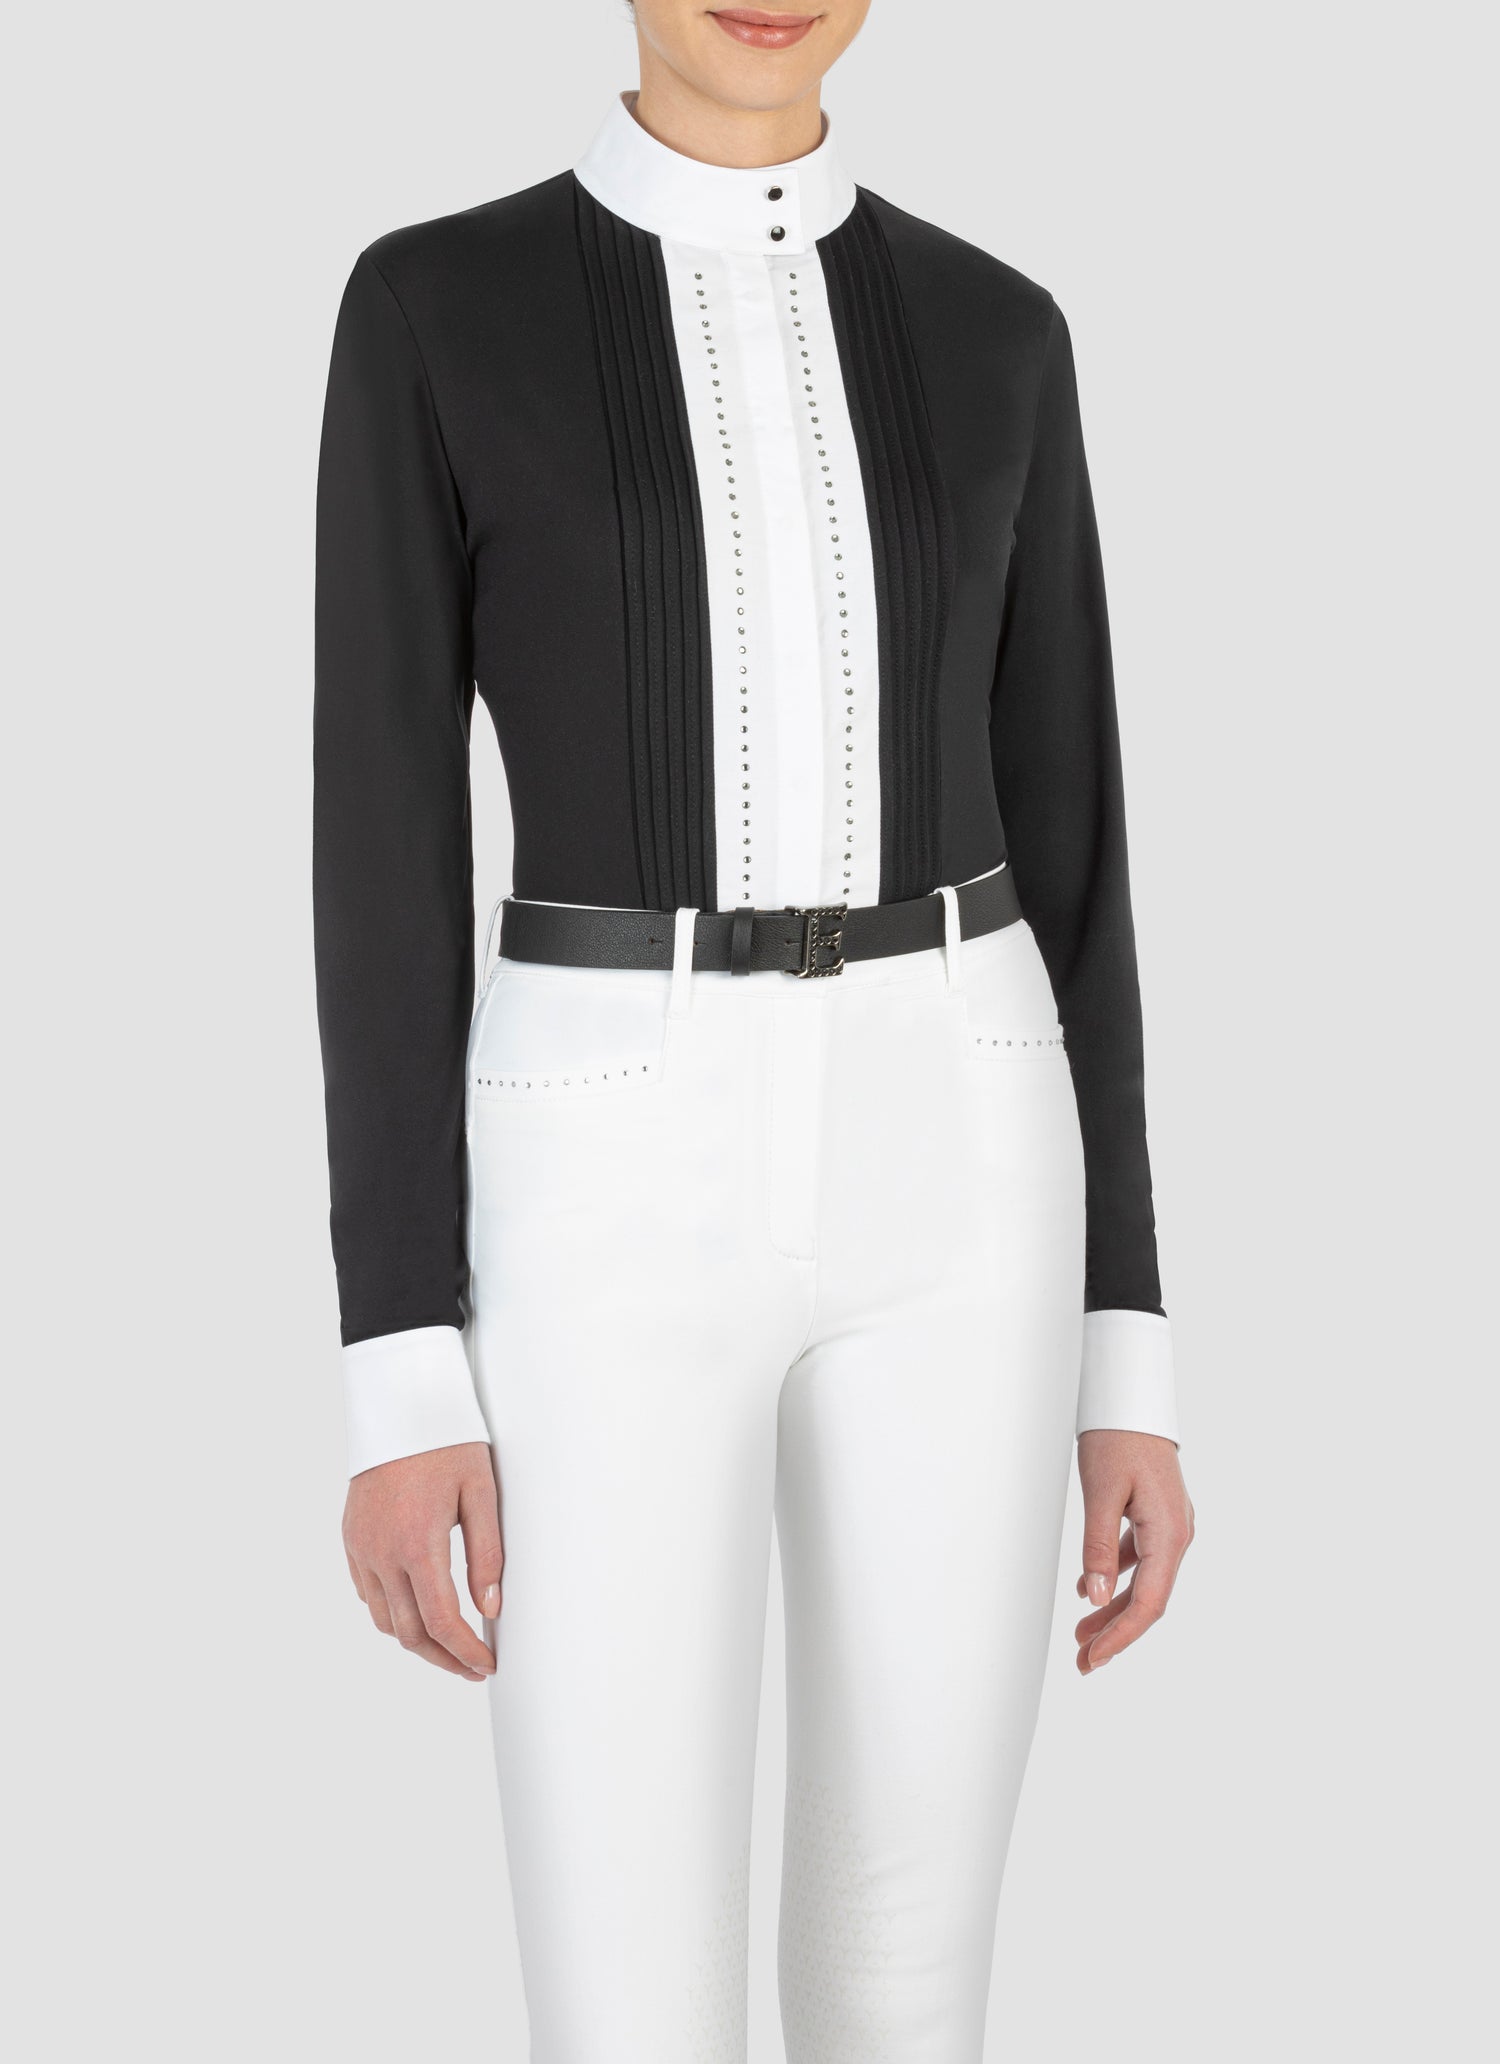 Equiline’s long sleeve show shirt has a twin line of diamanté’s running either side of the button placket gives a stunning look. Jersey fabric with woven placket and cuffs.  Available in black and white and all white. 